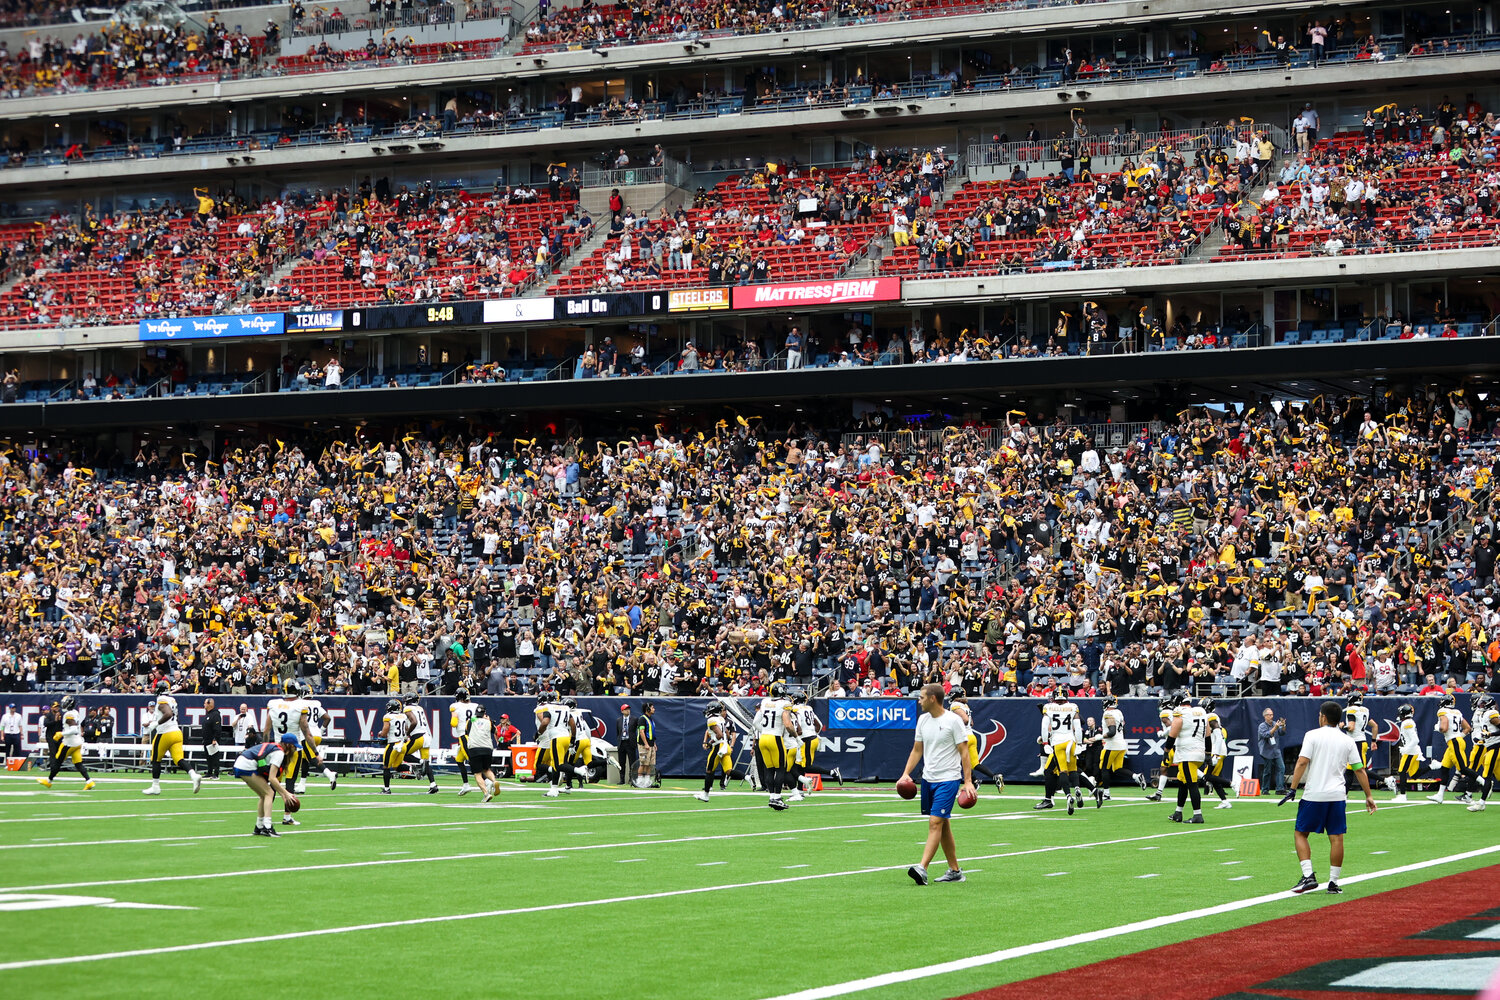 A large crowd of Pittsburgh fans greets the Steelers as they take the field for an NFL game between the Texans and the Steelers on October 1, 2023 in Houston.